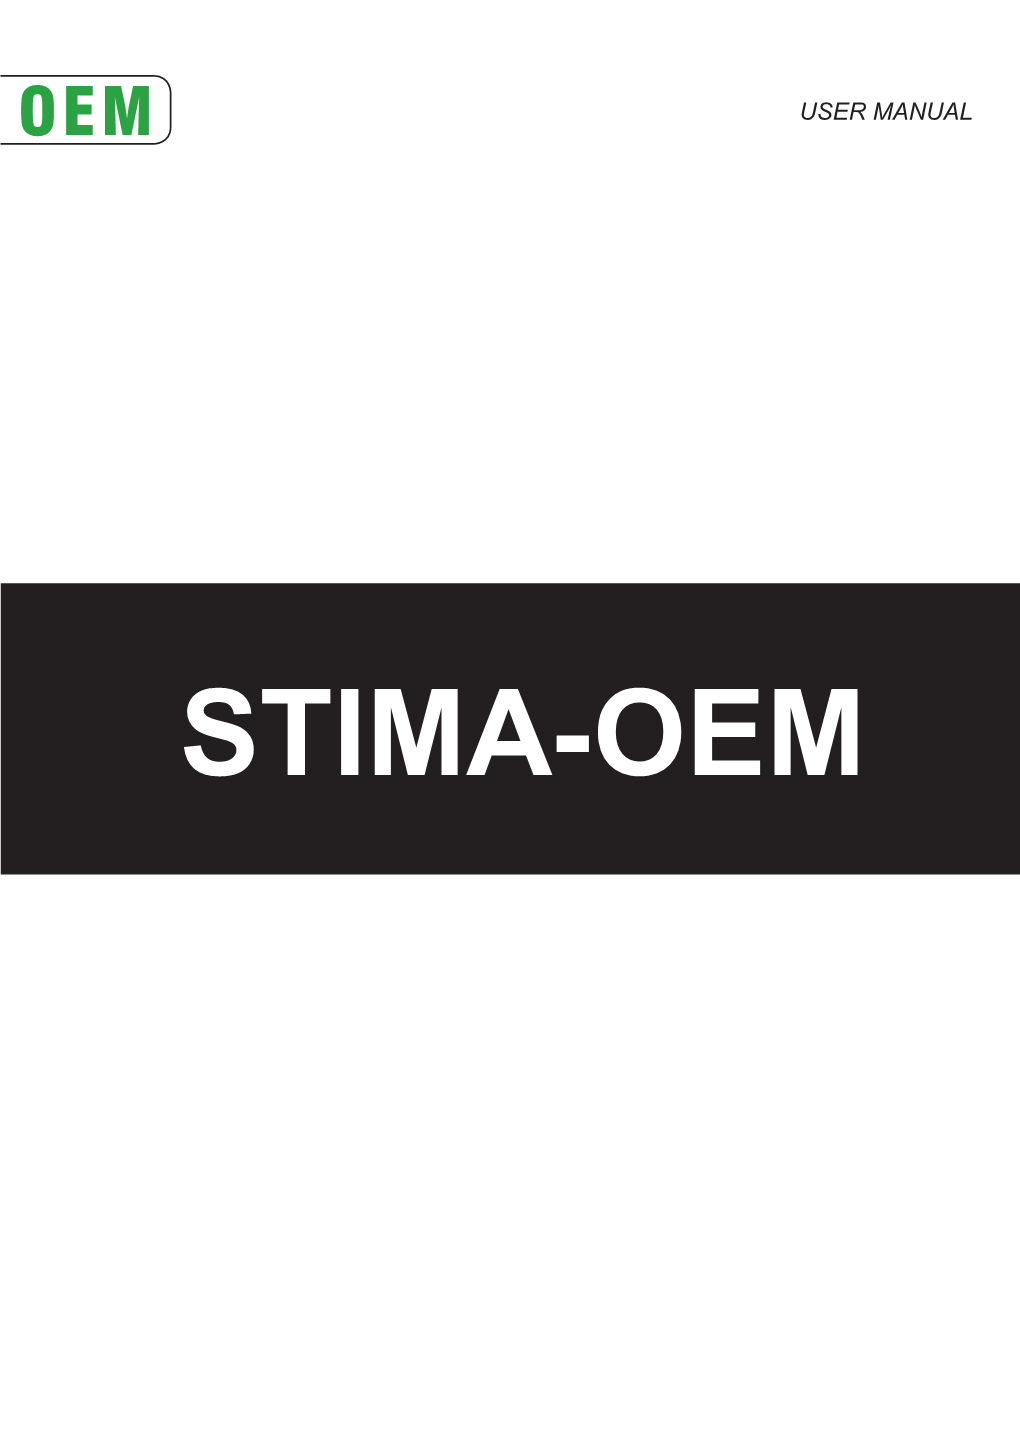 STIMA-OEMTIMA-OEM All Rights Reserved